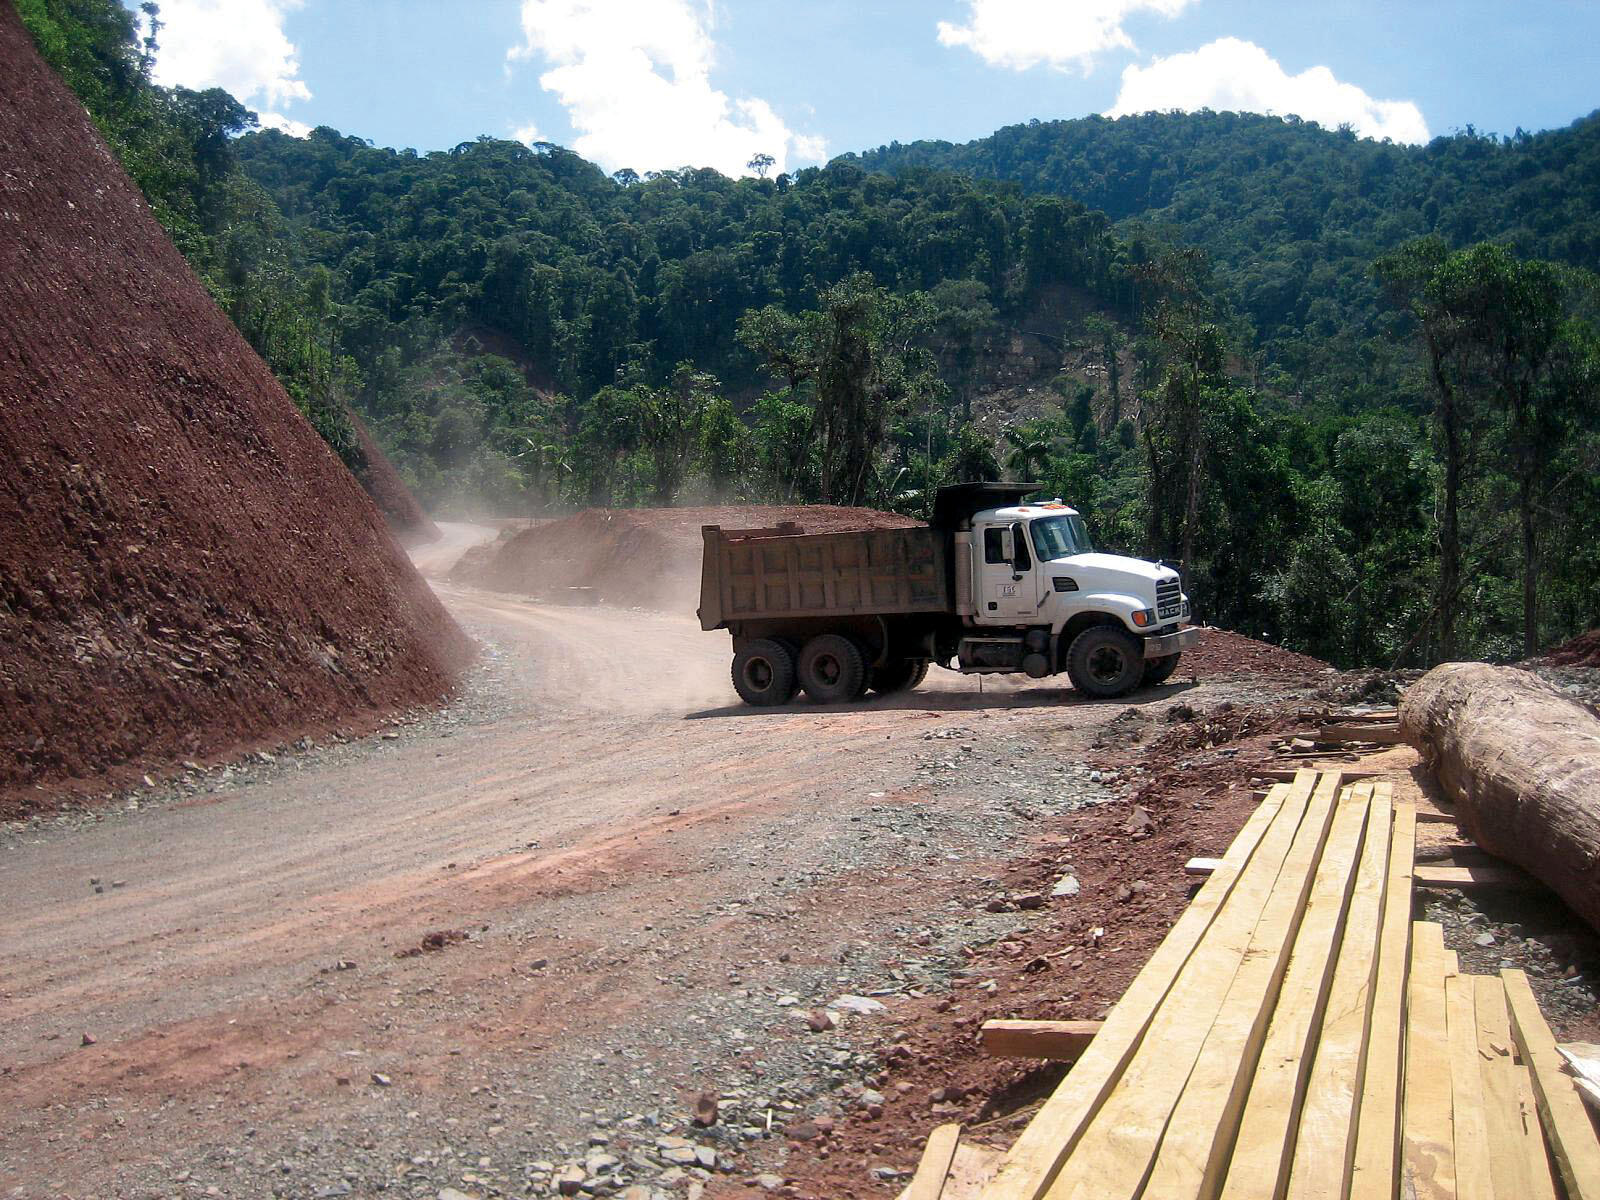 A road being built through the rainforest to reach oil fields in Ecuador. (Photo by Stephen Montgomery.)